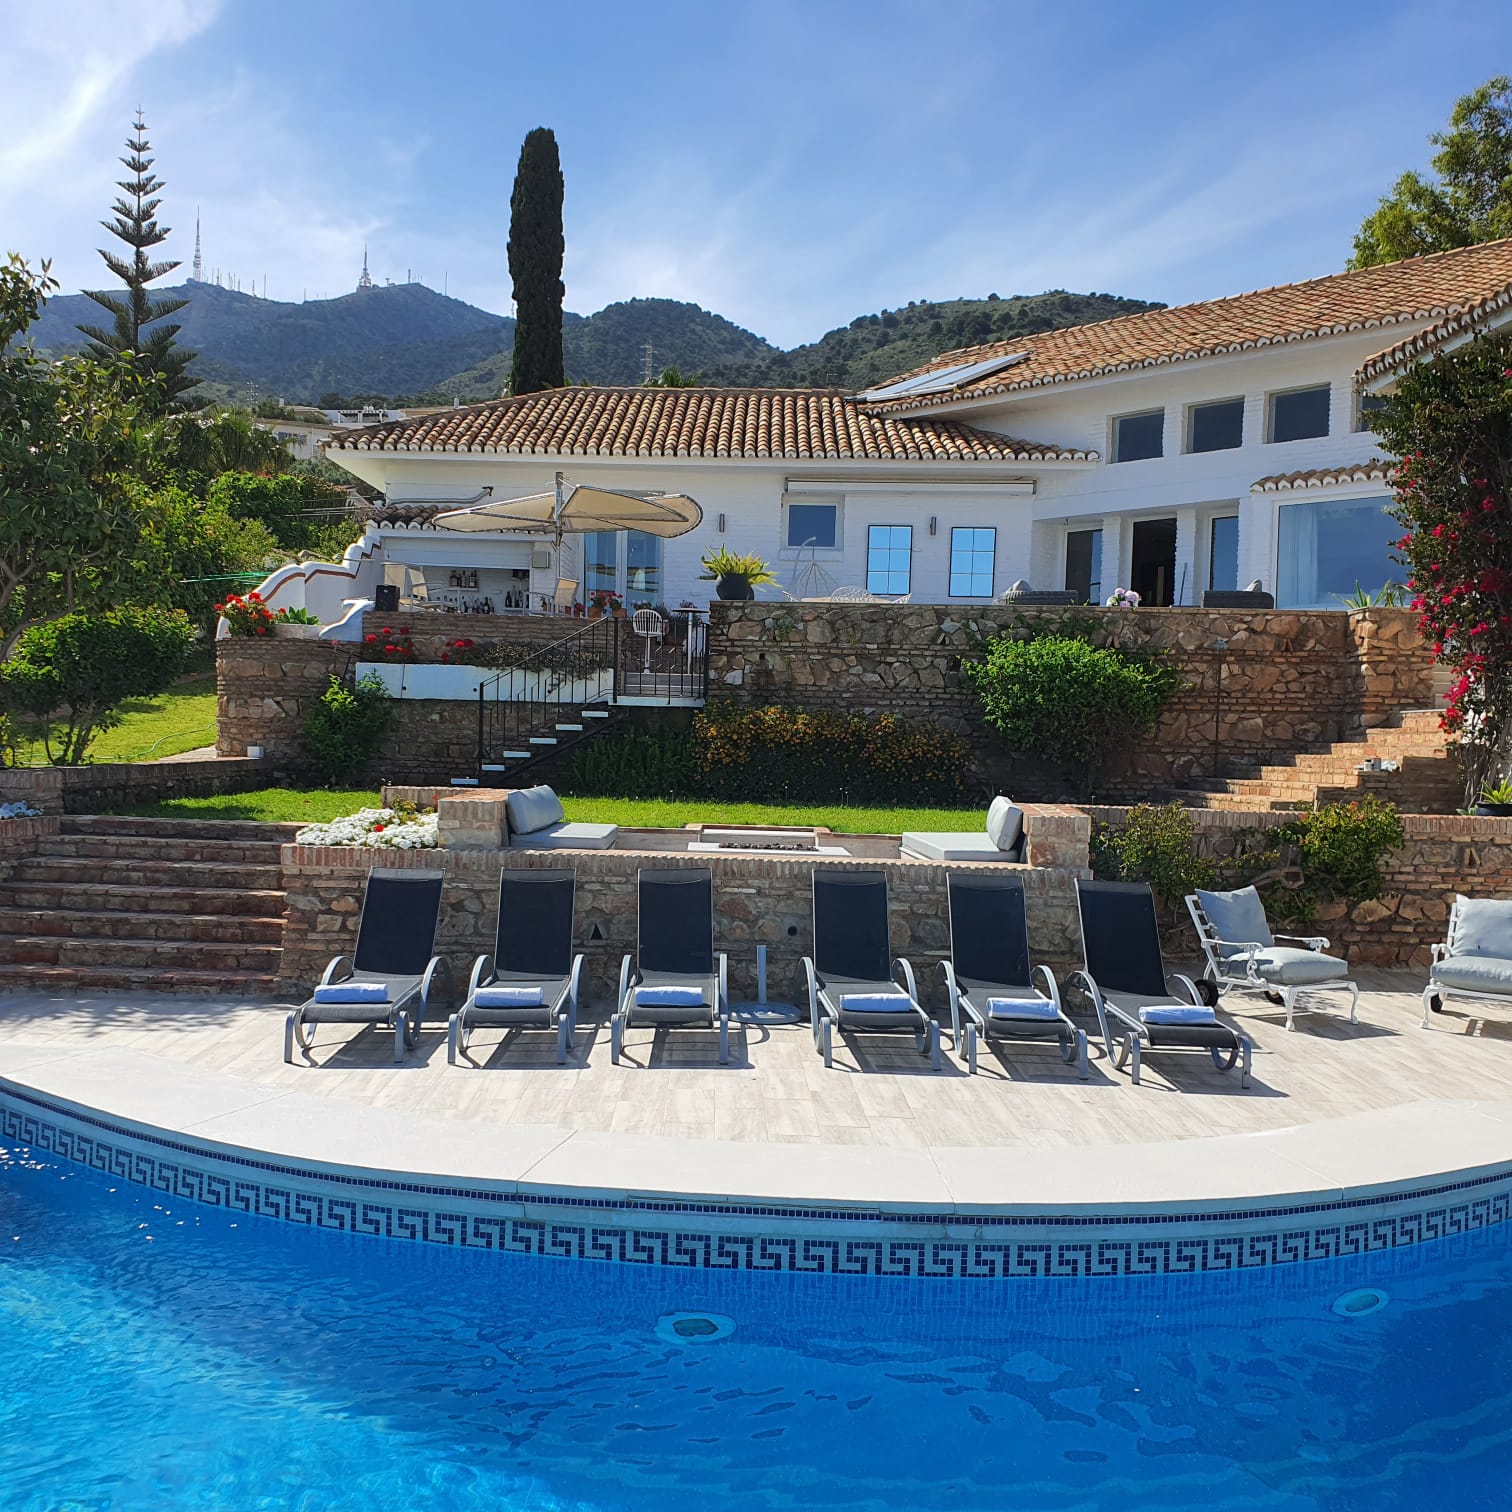 Presenting Viñas Viejas, an exquisite luxury villa nestled in the prestigious enclave of Rancho Domingo, just fifteen minutes west of Malaga airport.